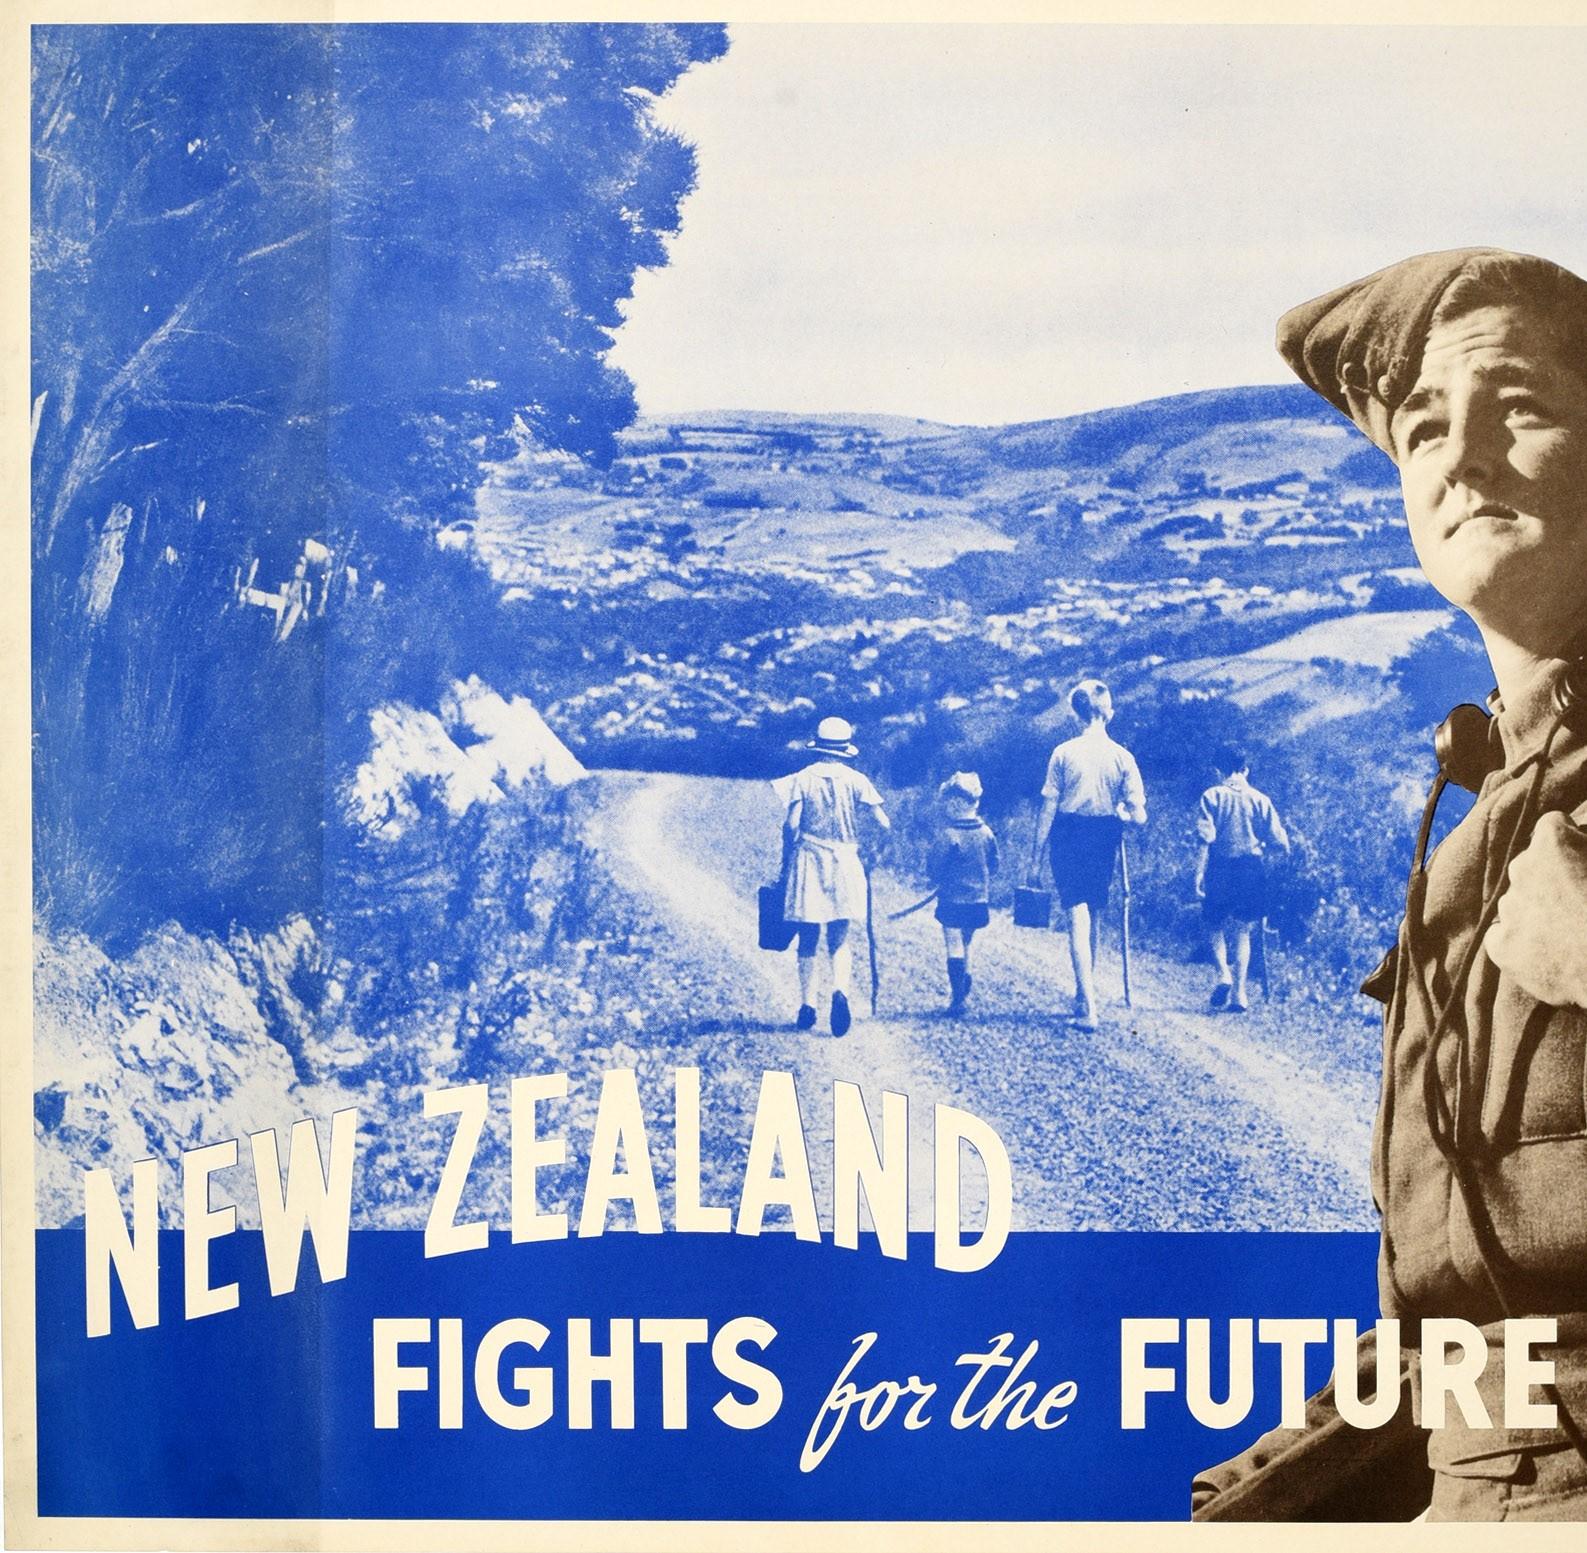 Original Vintage WWII Poster New Zealand Fights For The Future Soldier Children - Print by Unknown